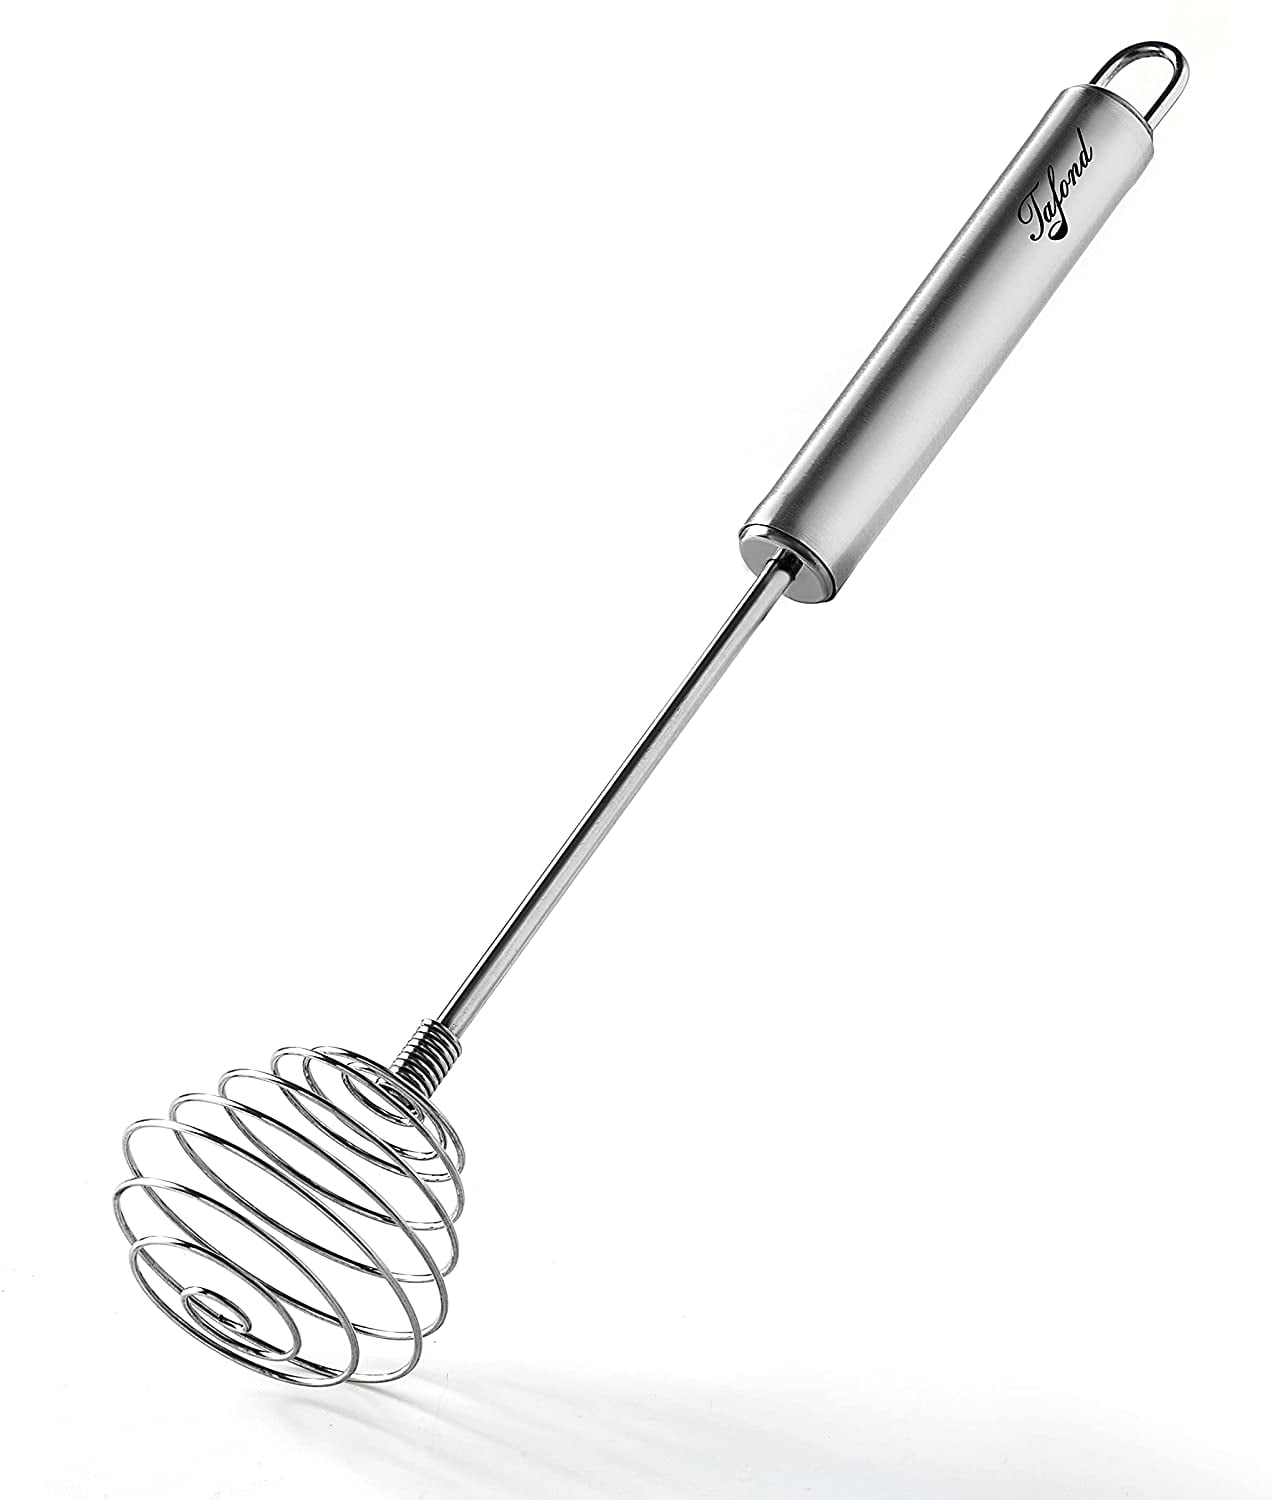 Catering Quality Hand Whisk Stainless Steel Kitchen Balloon Egg Beater US t 